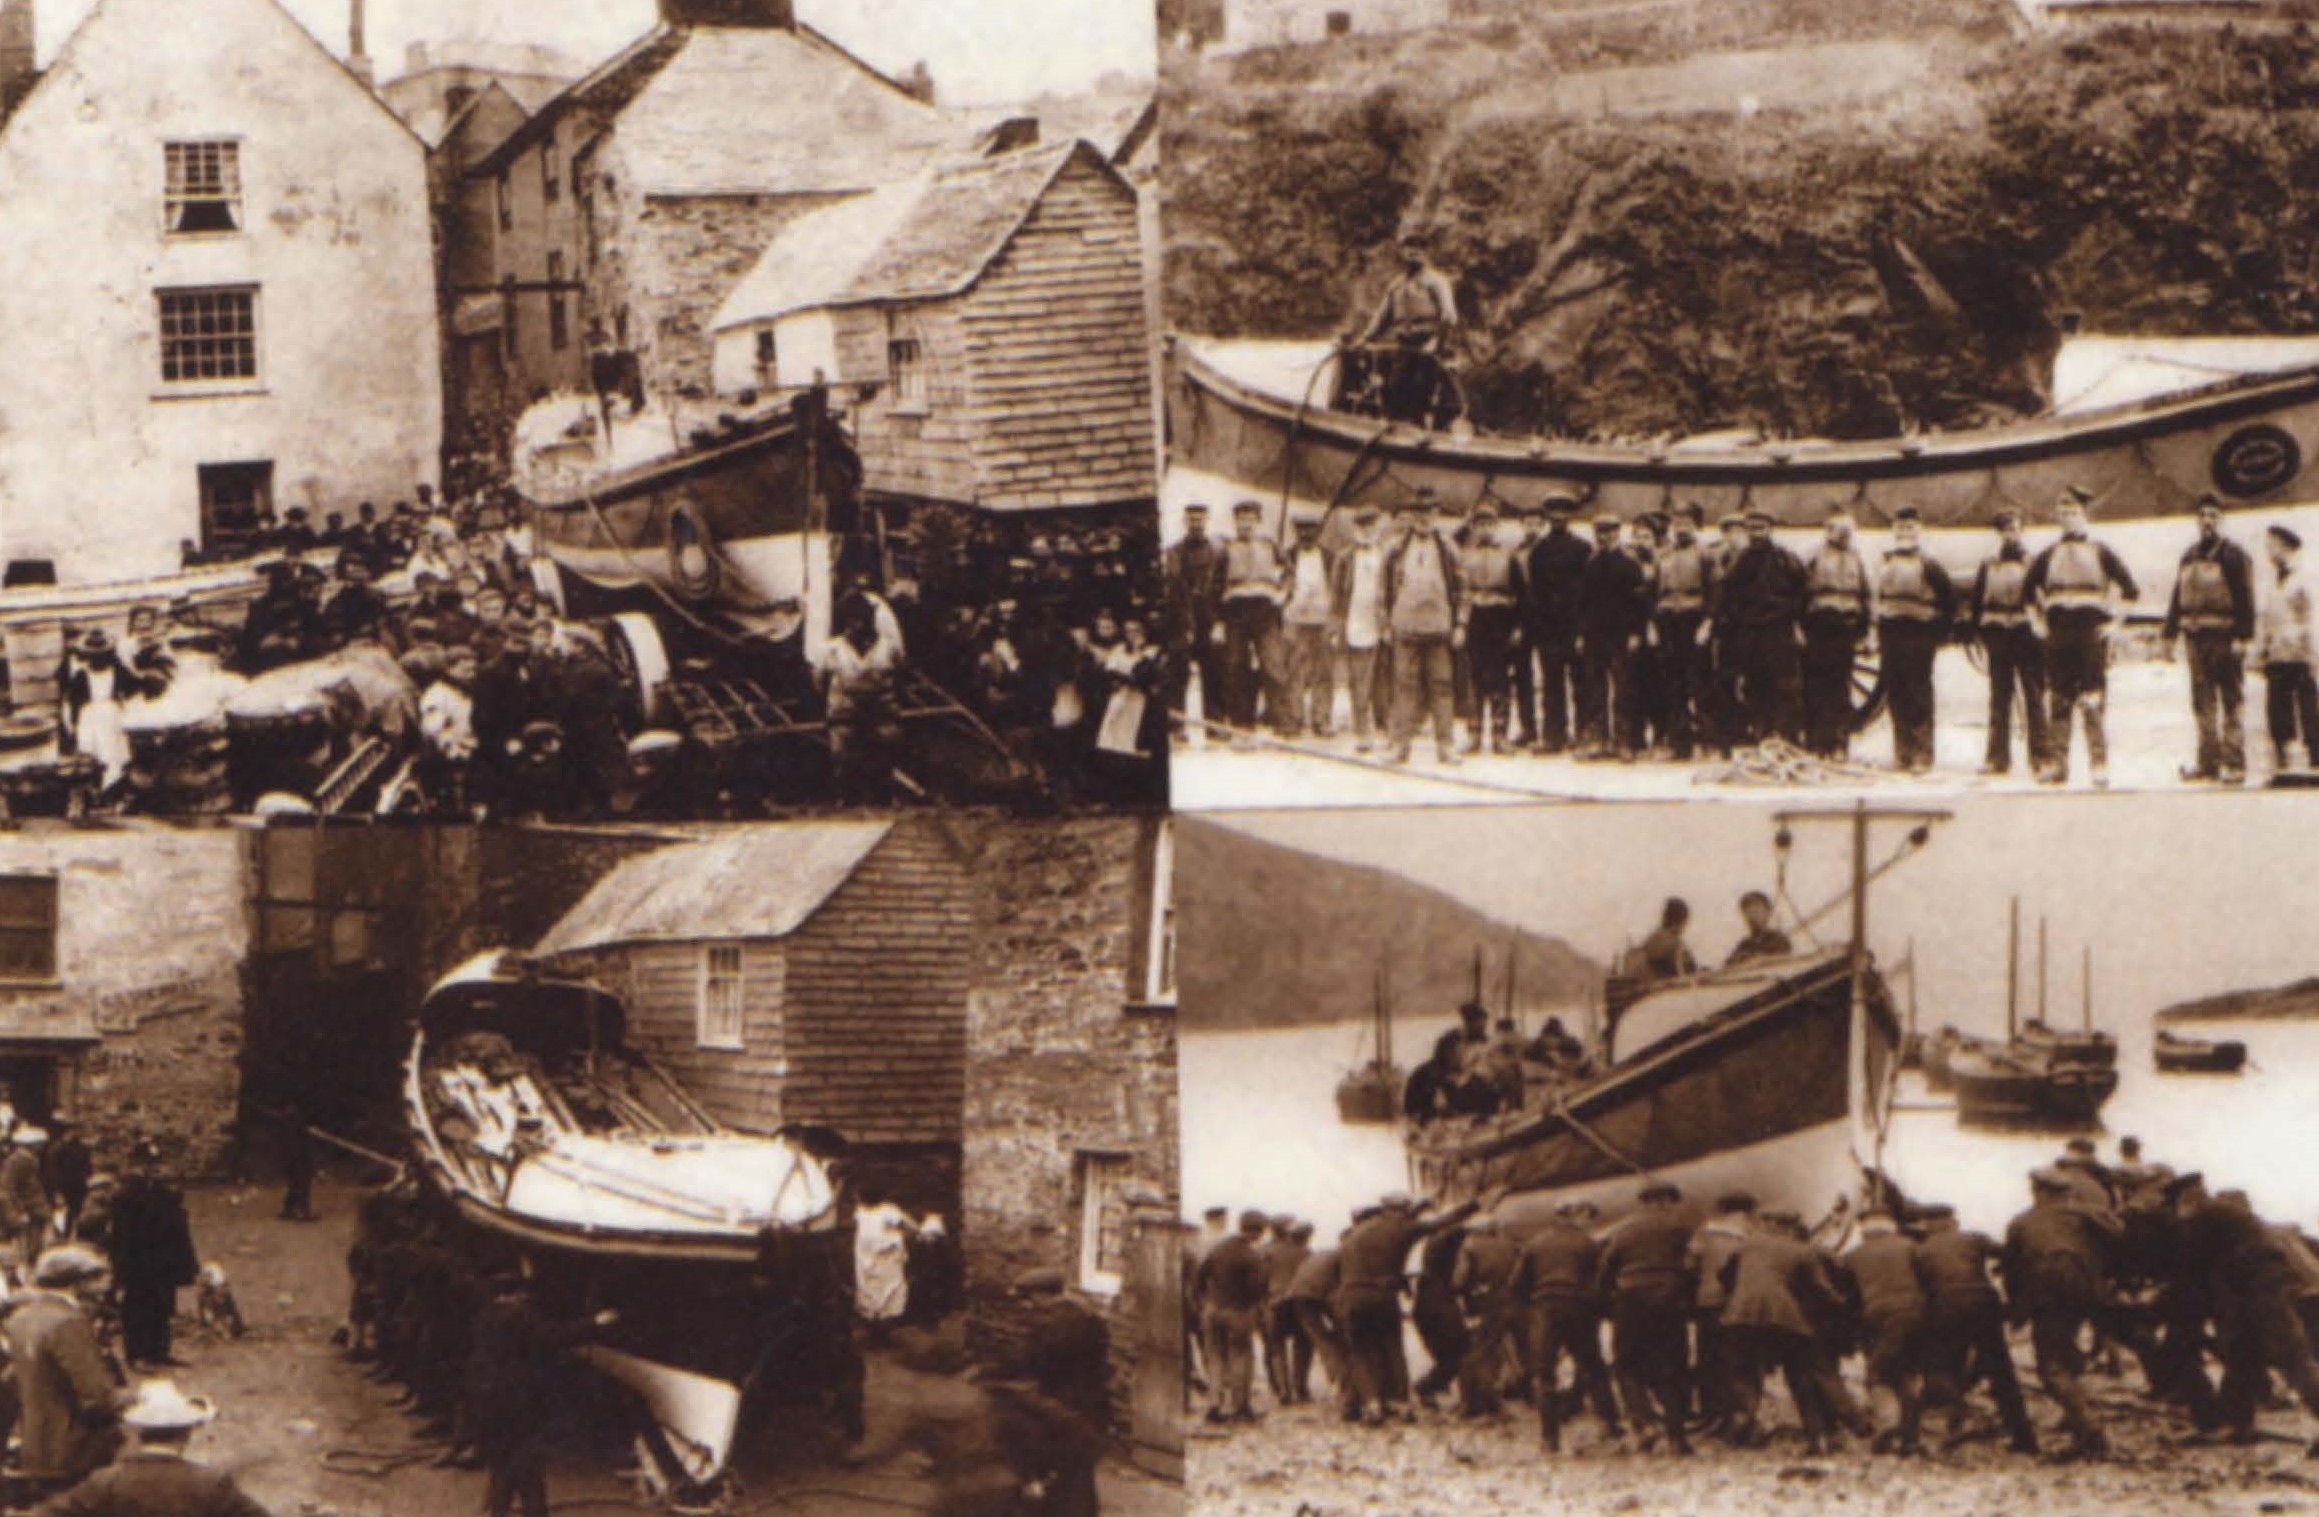 The Lifeboat and The Platt